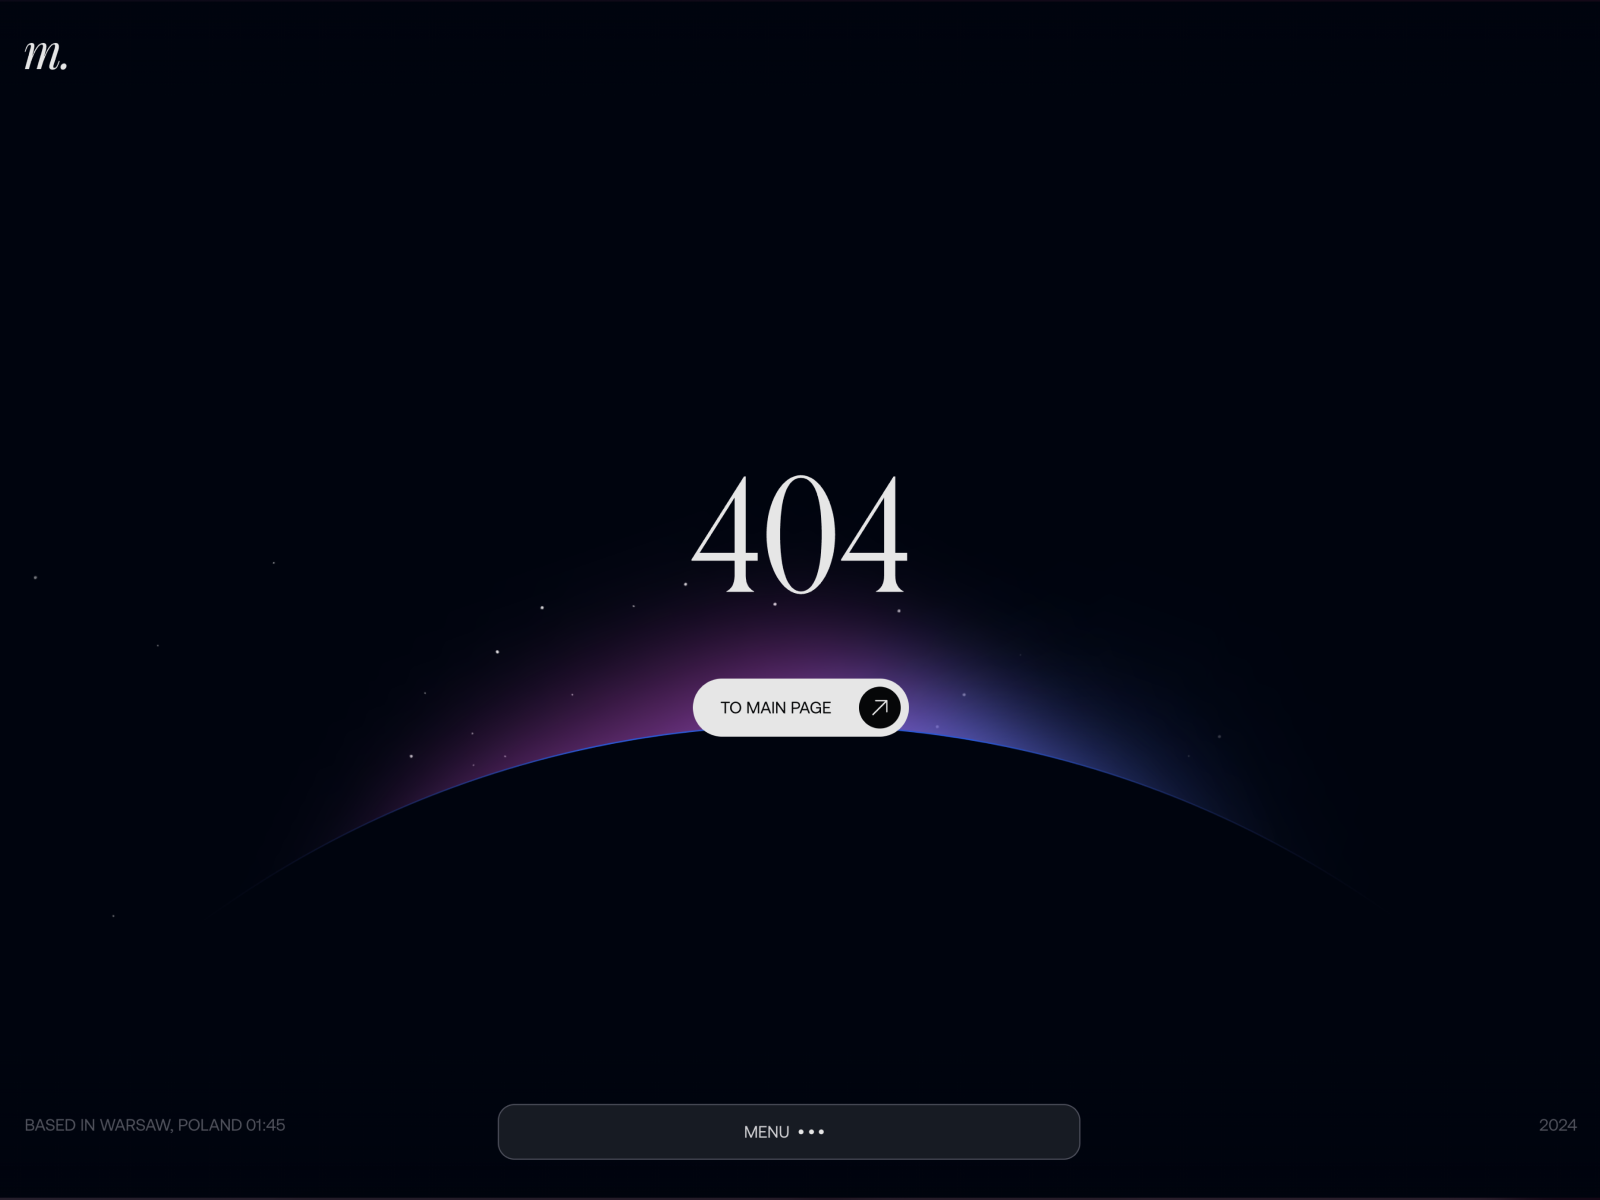 Animated 404 page